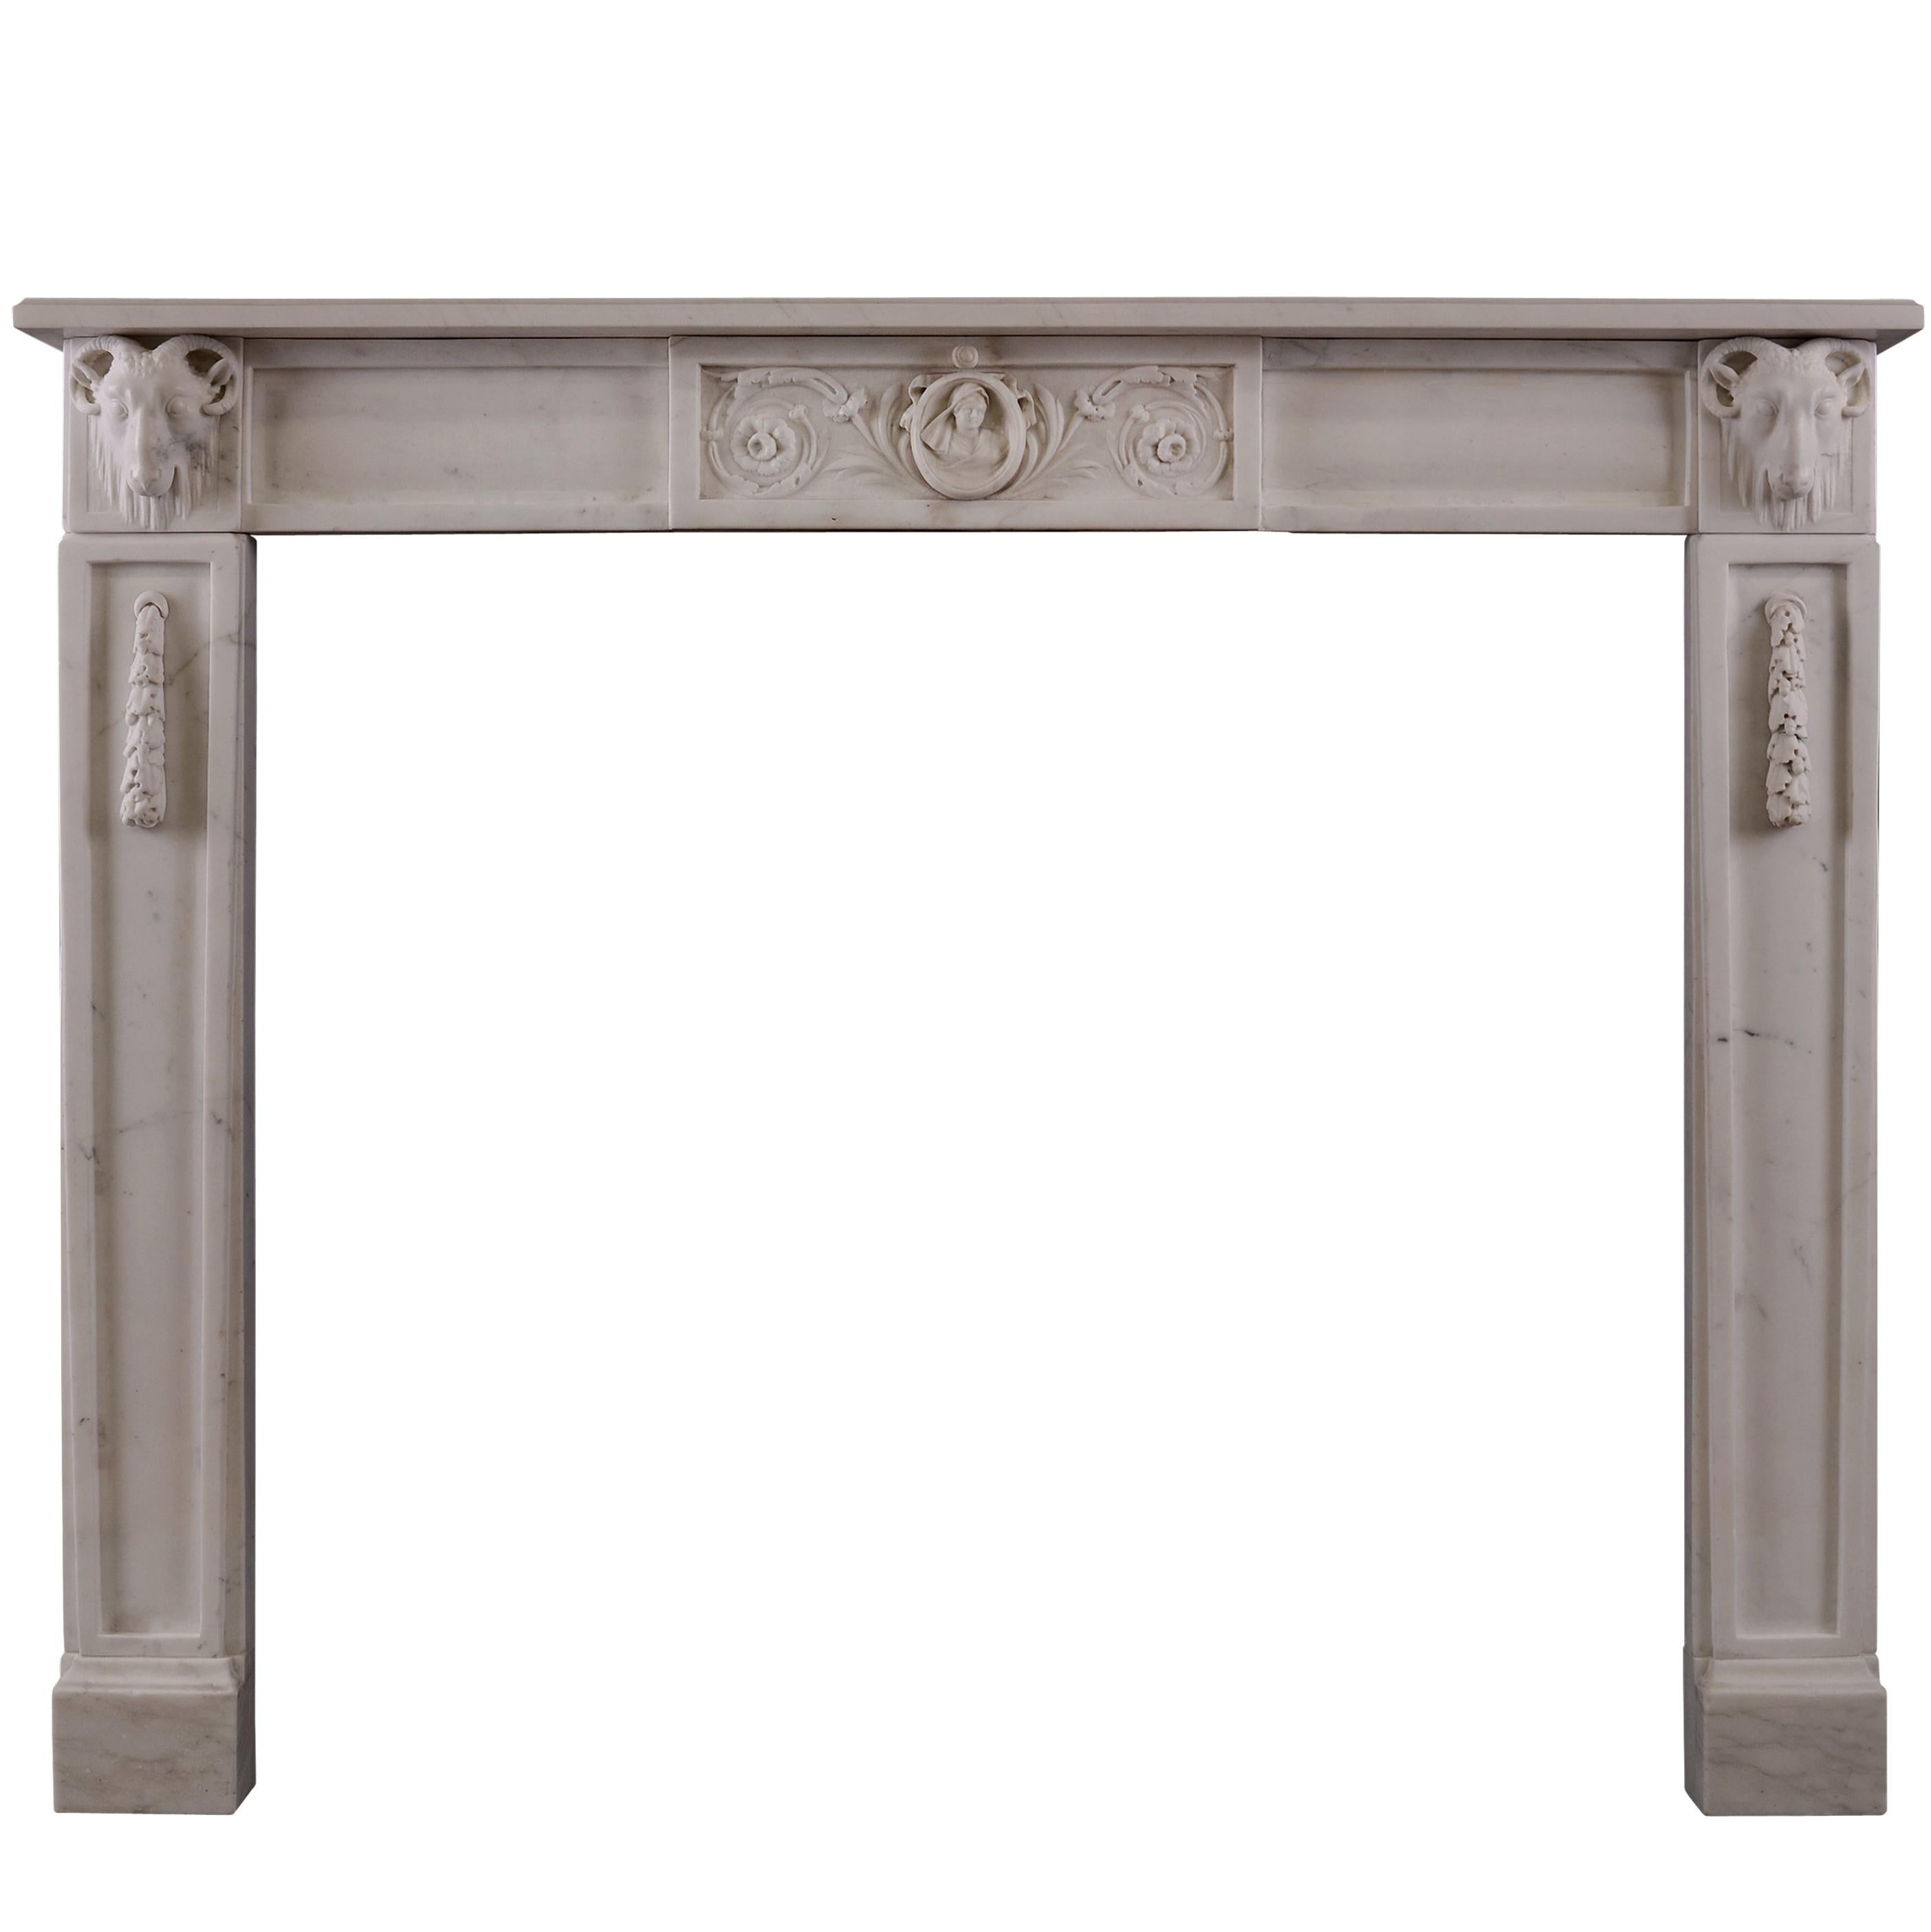 Italian Statuario Marble Fireplace with Carved Rams Heads